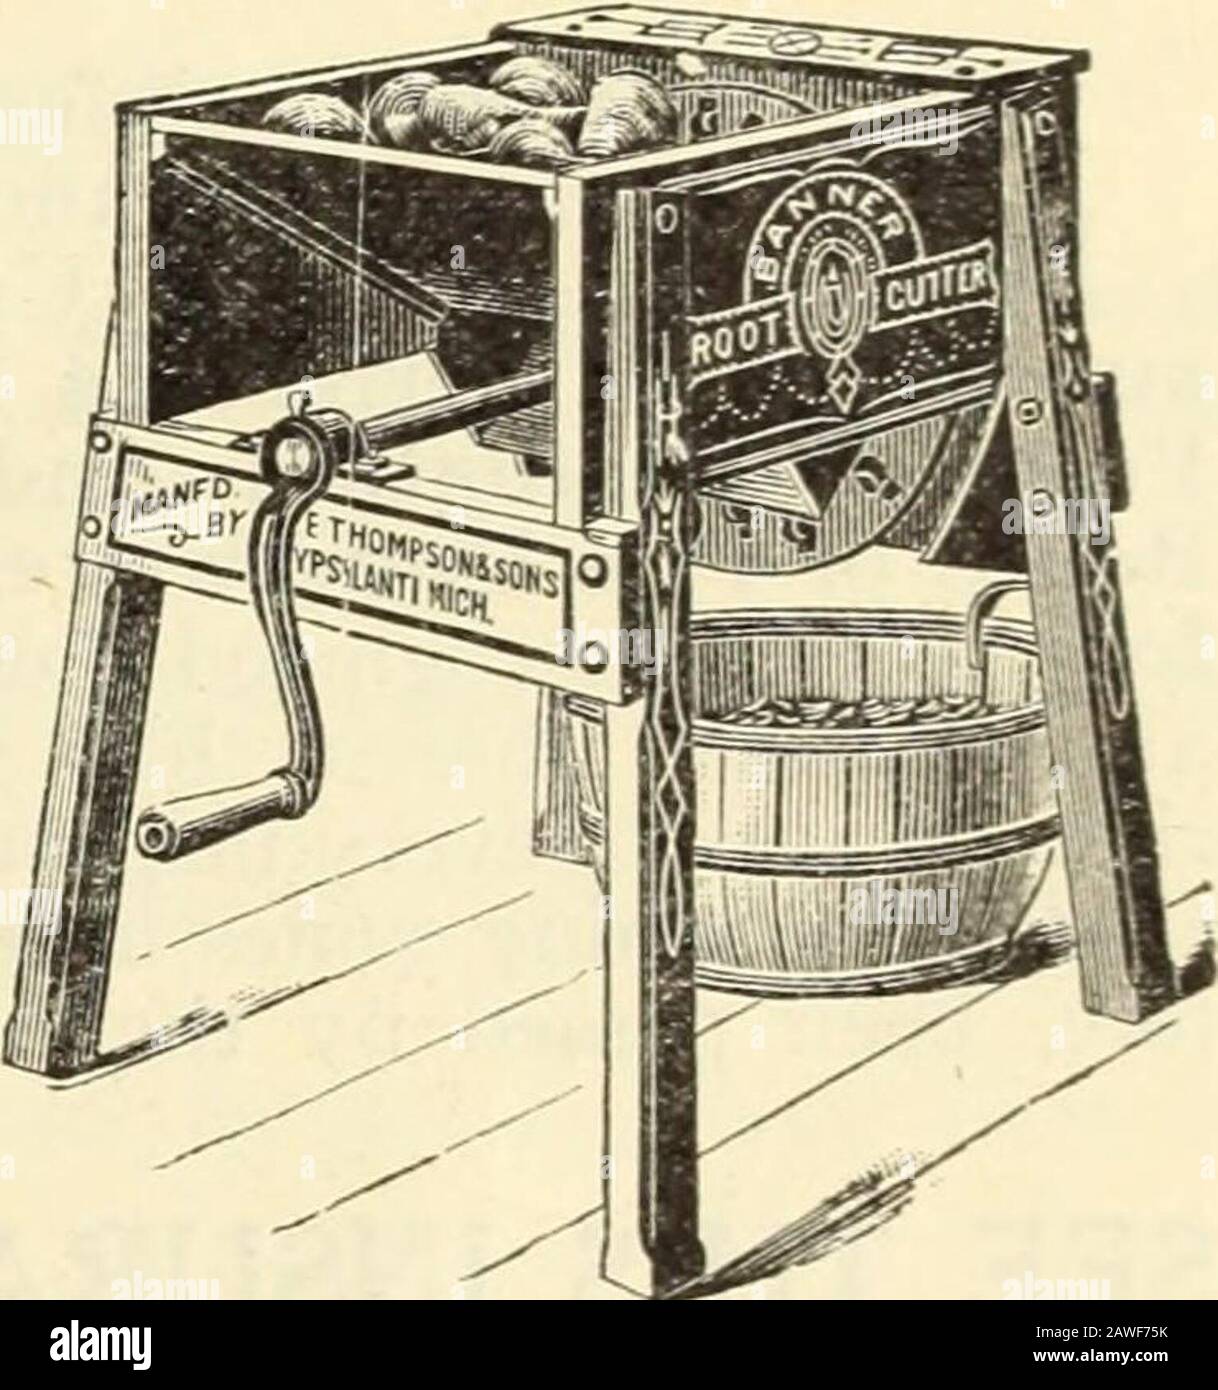 Johnson's garden & farm manual : 1910 . CYLINDER CHURN. No. 3—7 Gallons,No. 4-10 Gallons, each,each, S2.753-25 THE,RMOME.TE,RS Floating Glass Dairy, each, 15c. and $0 25 Hot Bed or Mushroom Bed, with brass end. i 50 Incubator Thermometers, each 50 Brooder Thermometers, each 40 BANNE^Ik ROOT CUTTE^RS No. 7. Small ma-chine for cutting fine;very useful. $5.00. No. 20. HandMachine. $8.50. No. 15. Handand Power. HasBand Wheel for lightpower. $9.50. No. 28. Improvedmachine for handand power. Fine forlarge users. Send forcircular. Without pulley, $15.00; with banner root cutter, Nopulley, $16.00. Cap Stock Photo